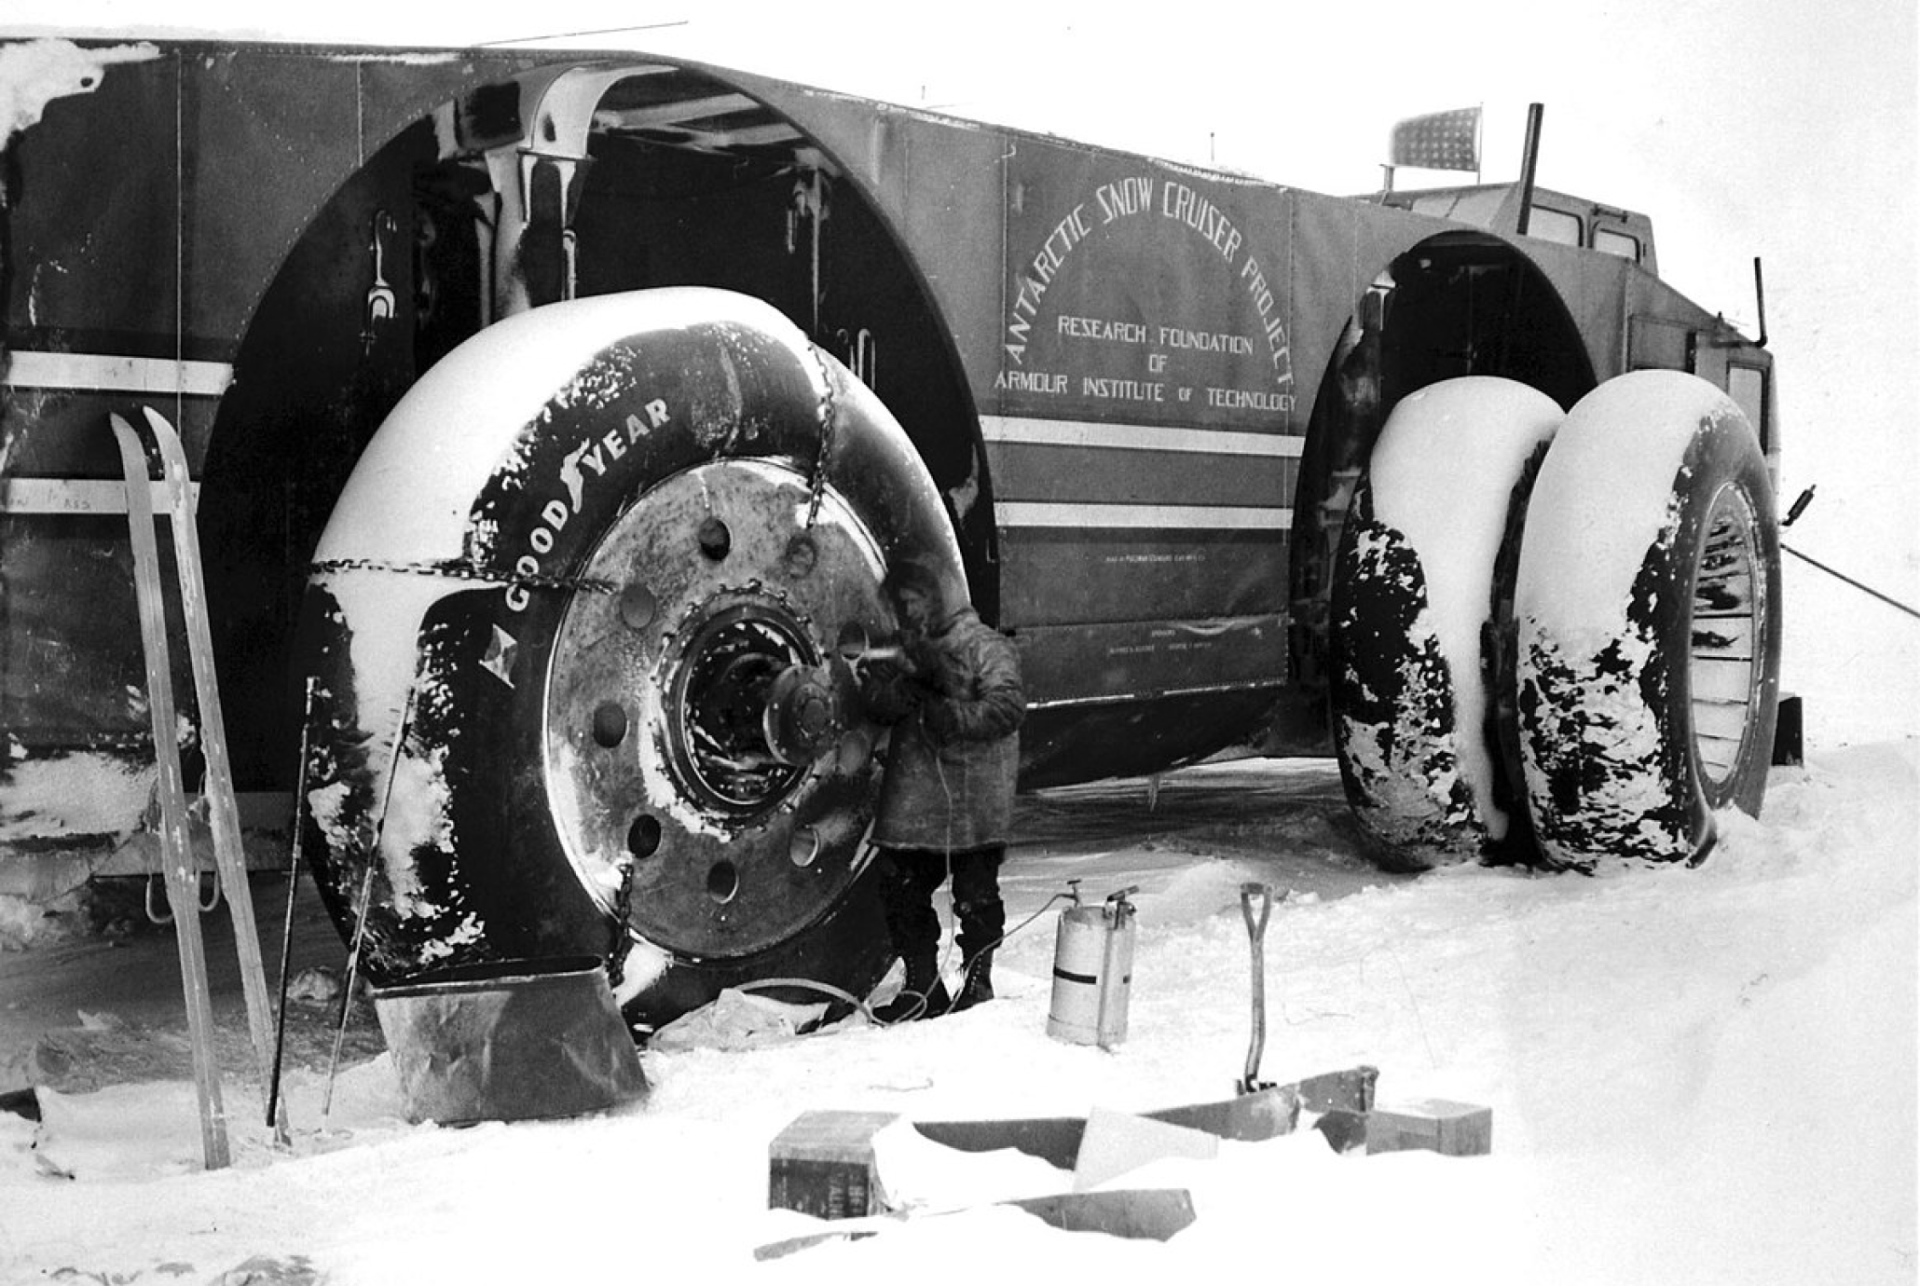 Even an additional set of (spare) wheels and chains did not completely eliminate the driving problems.